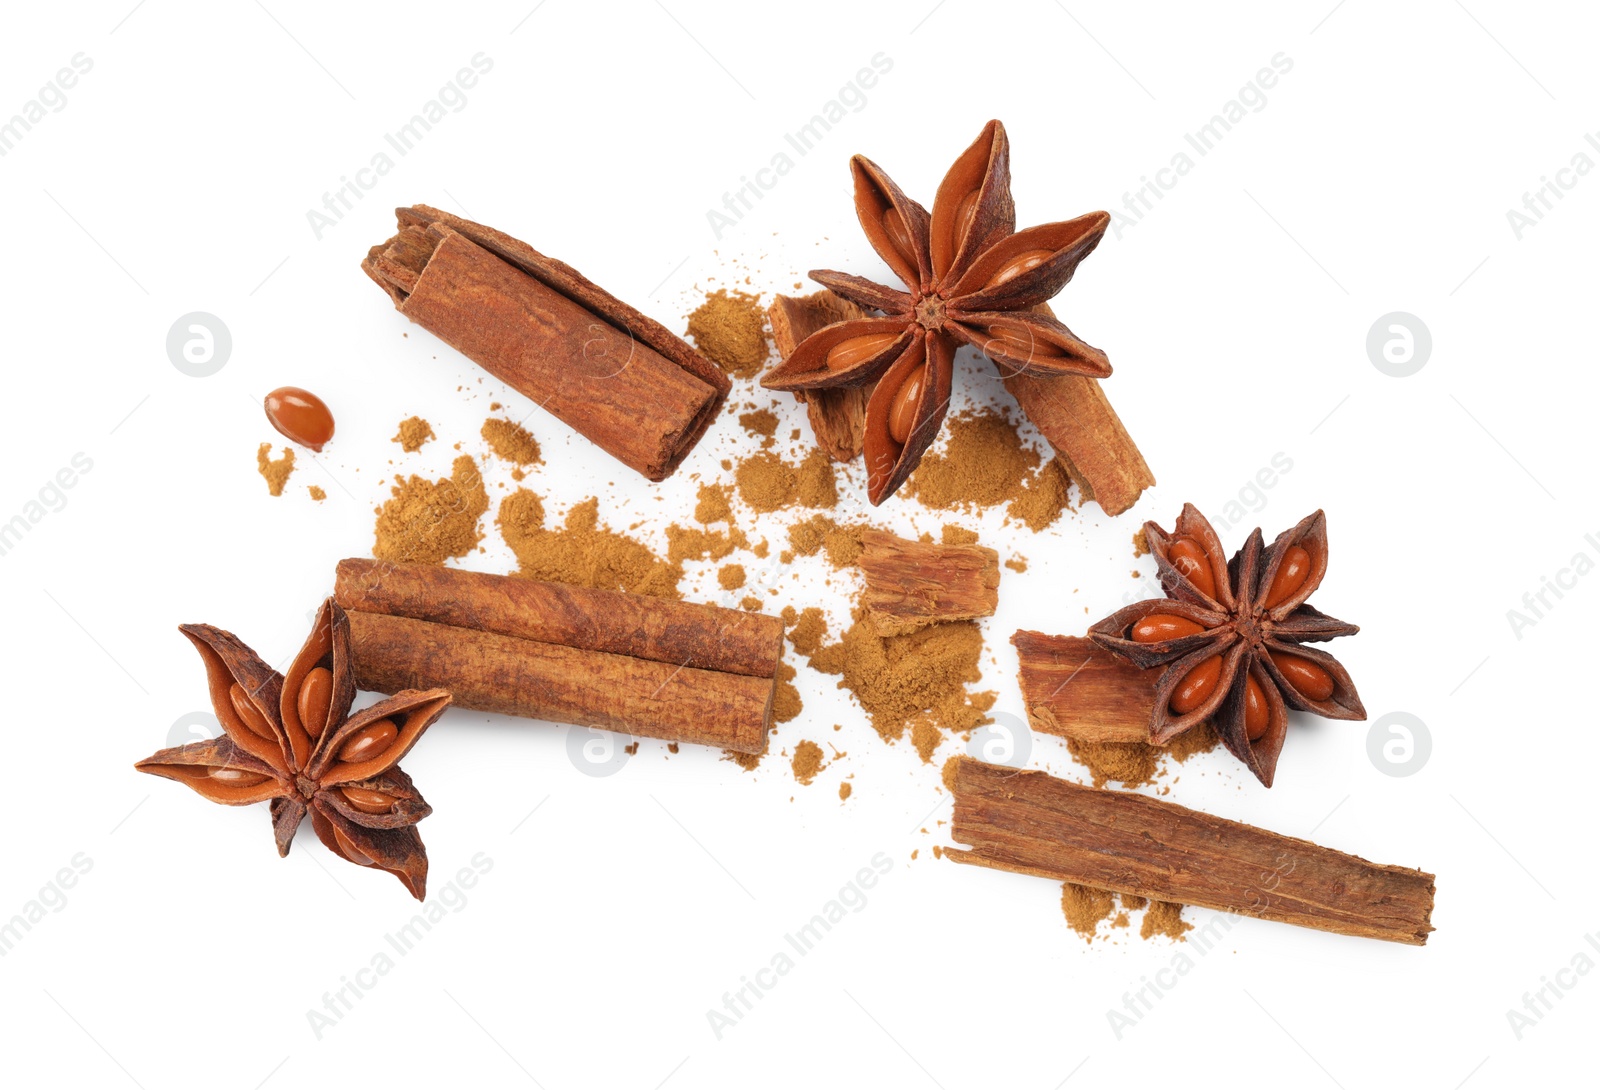 Photo of Dry aromatic cinnamon sticks, powder and anise stars isolated on white, top view